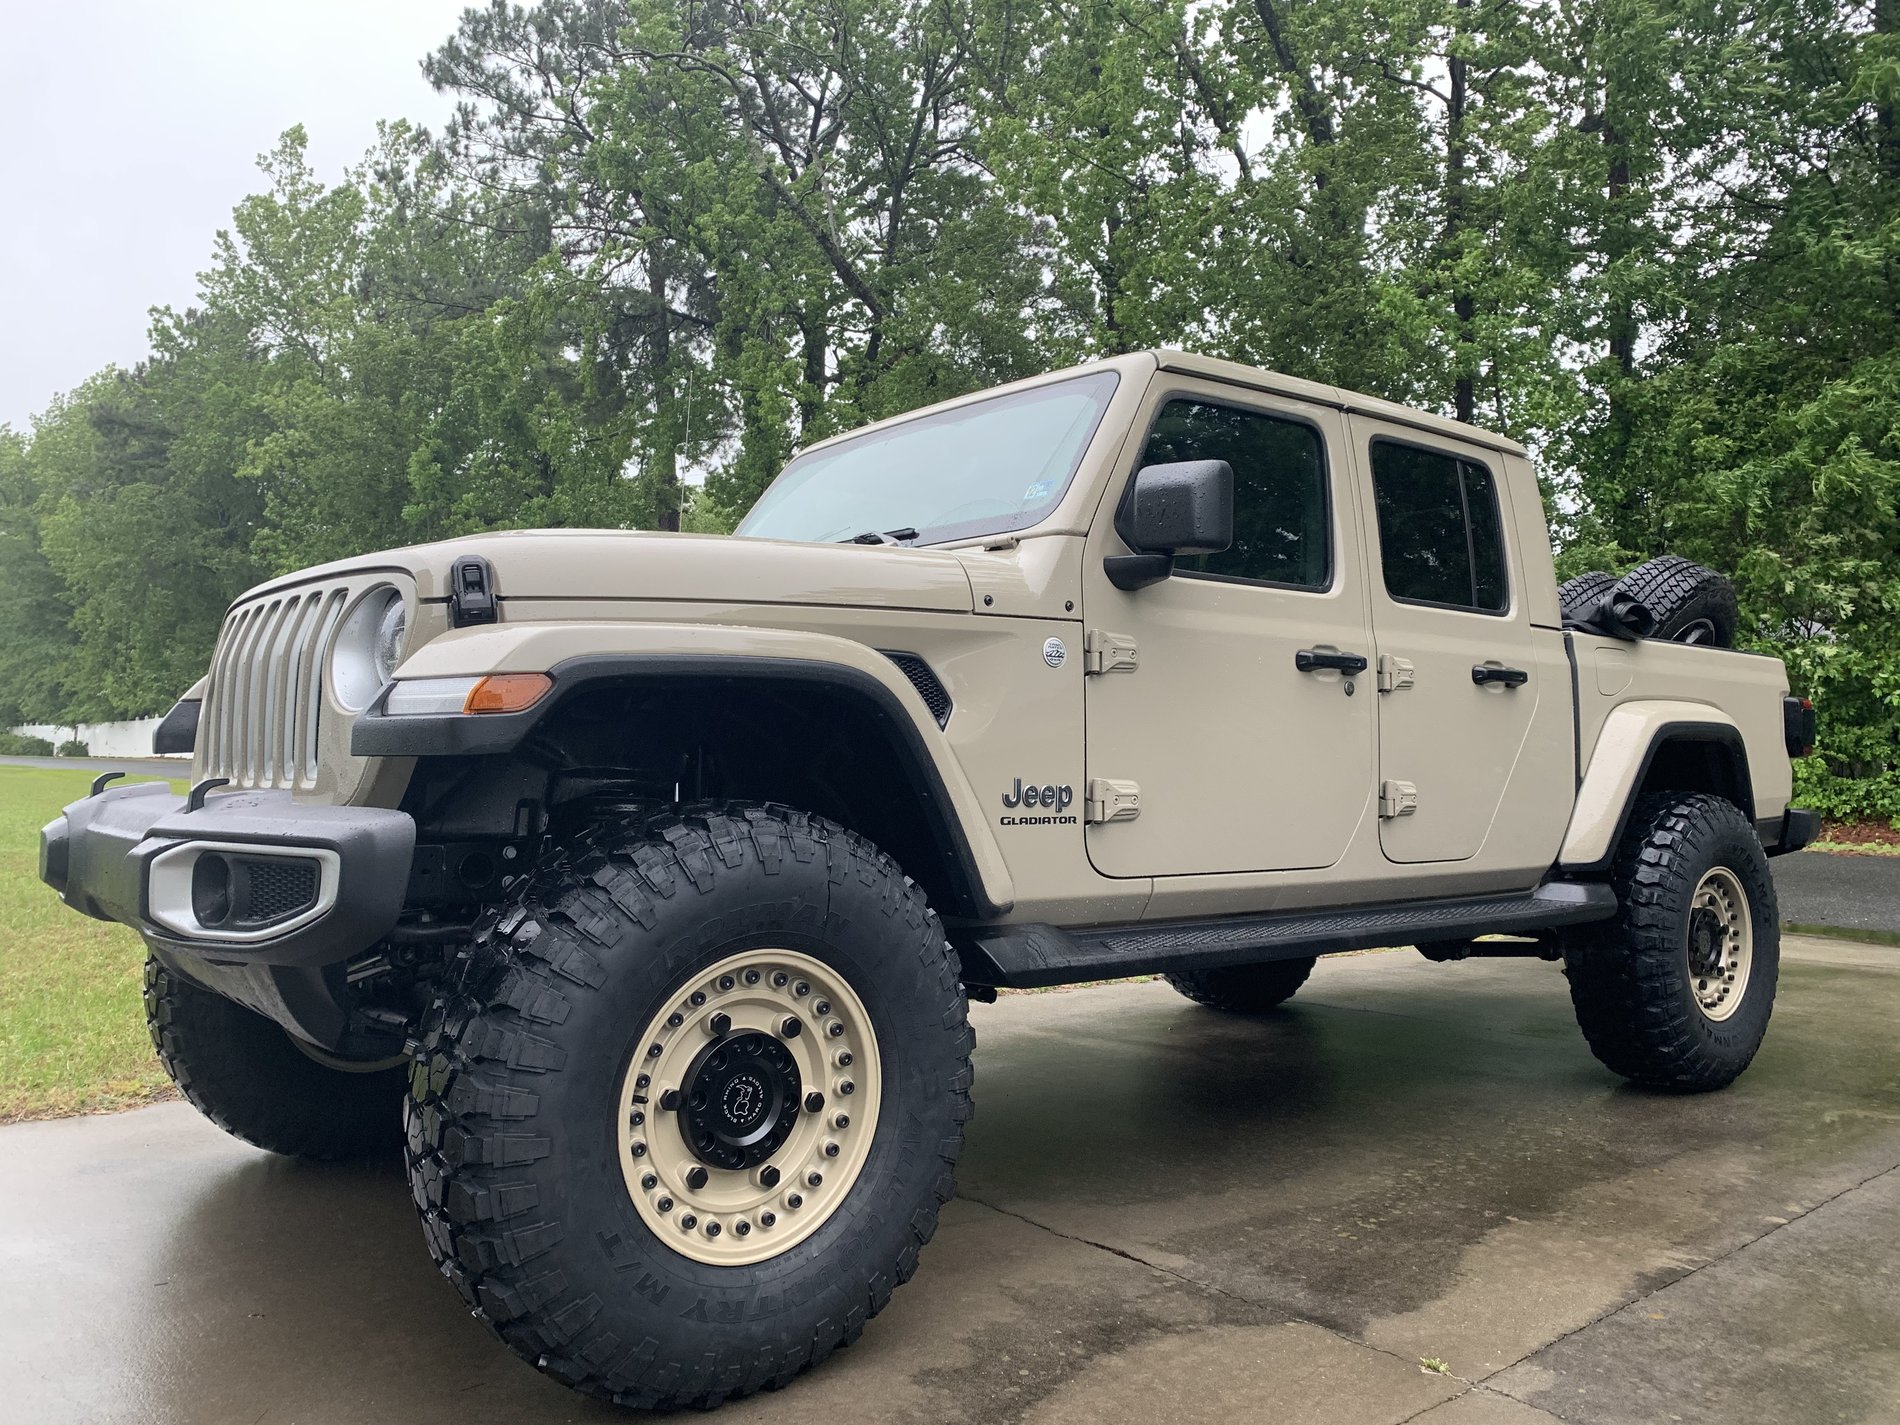 Jeep Gladiator Michael's slow and steady Gobi Overland build E75C5EC1-D0E2-4973-A936-324D8F83DFD0